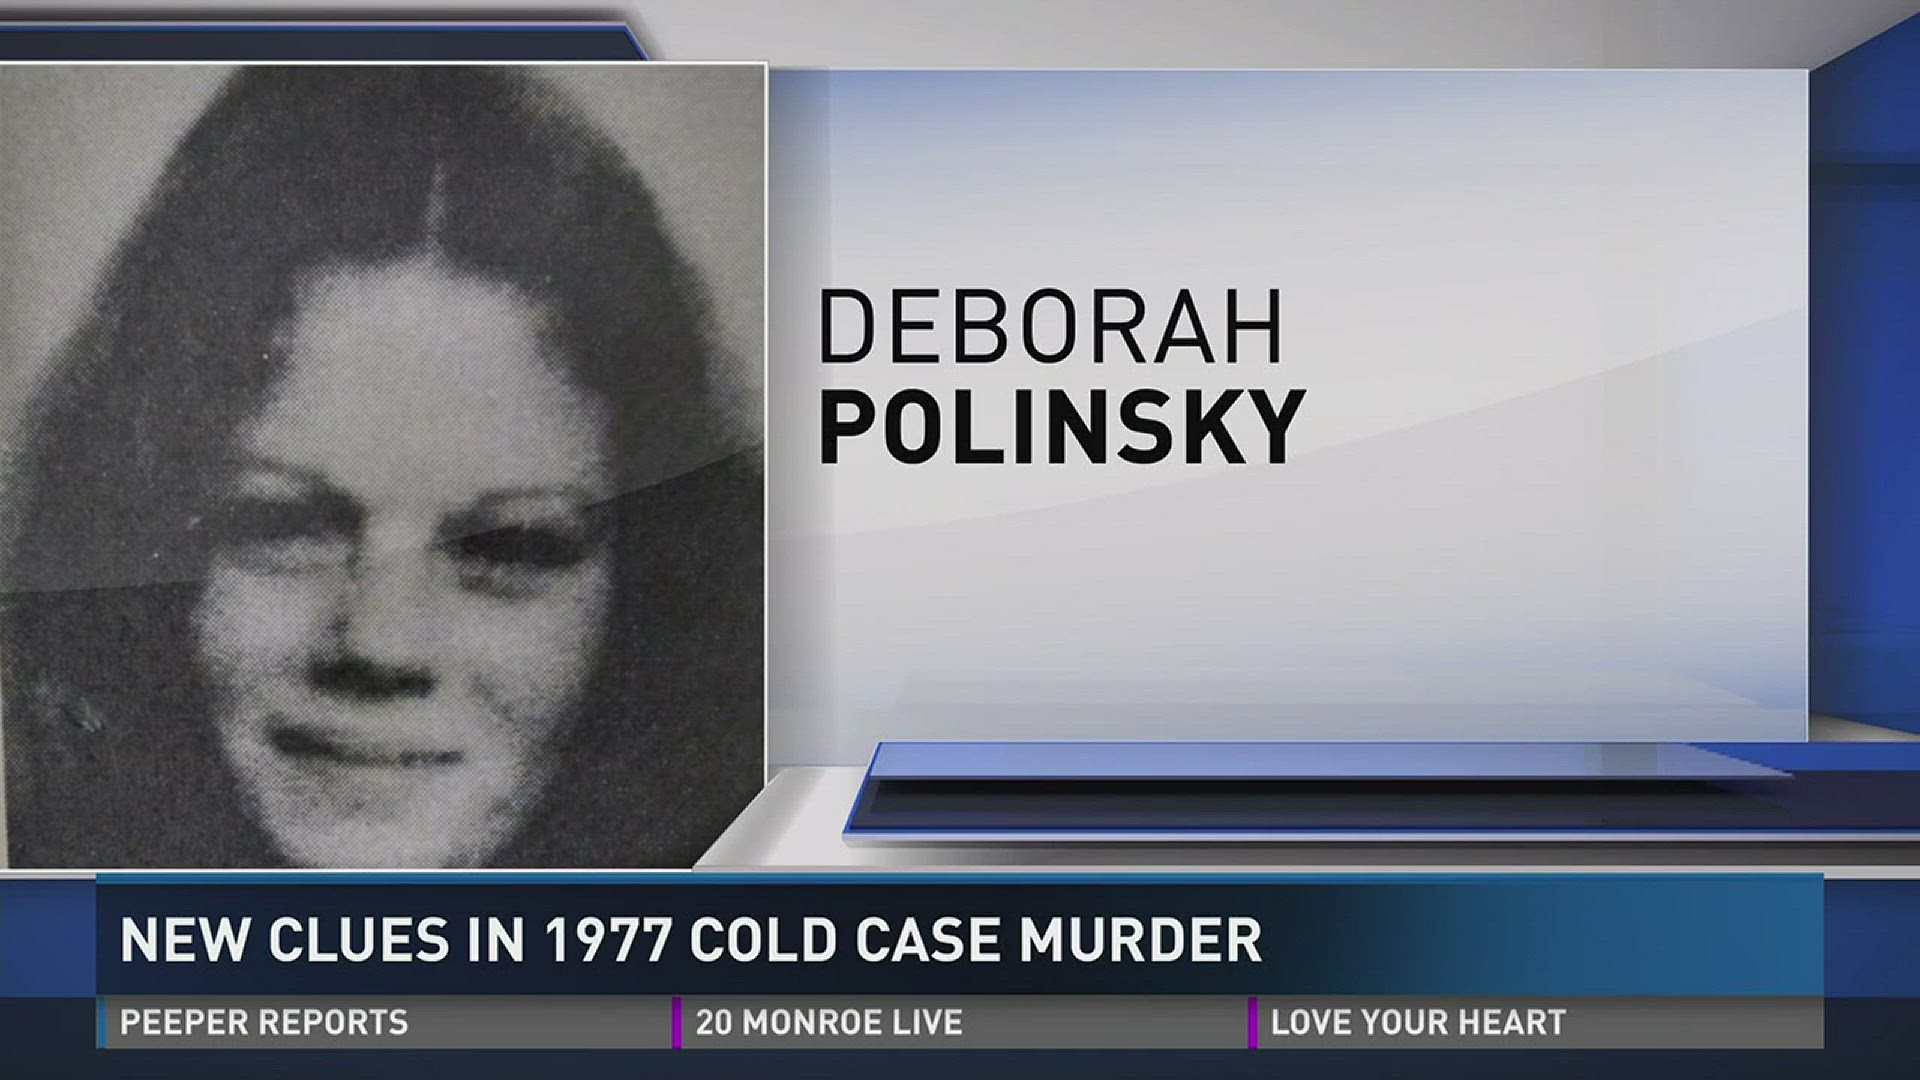 New clues in 1977 cold case murder